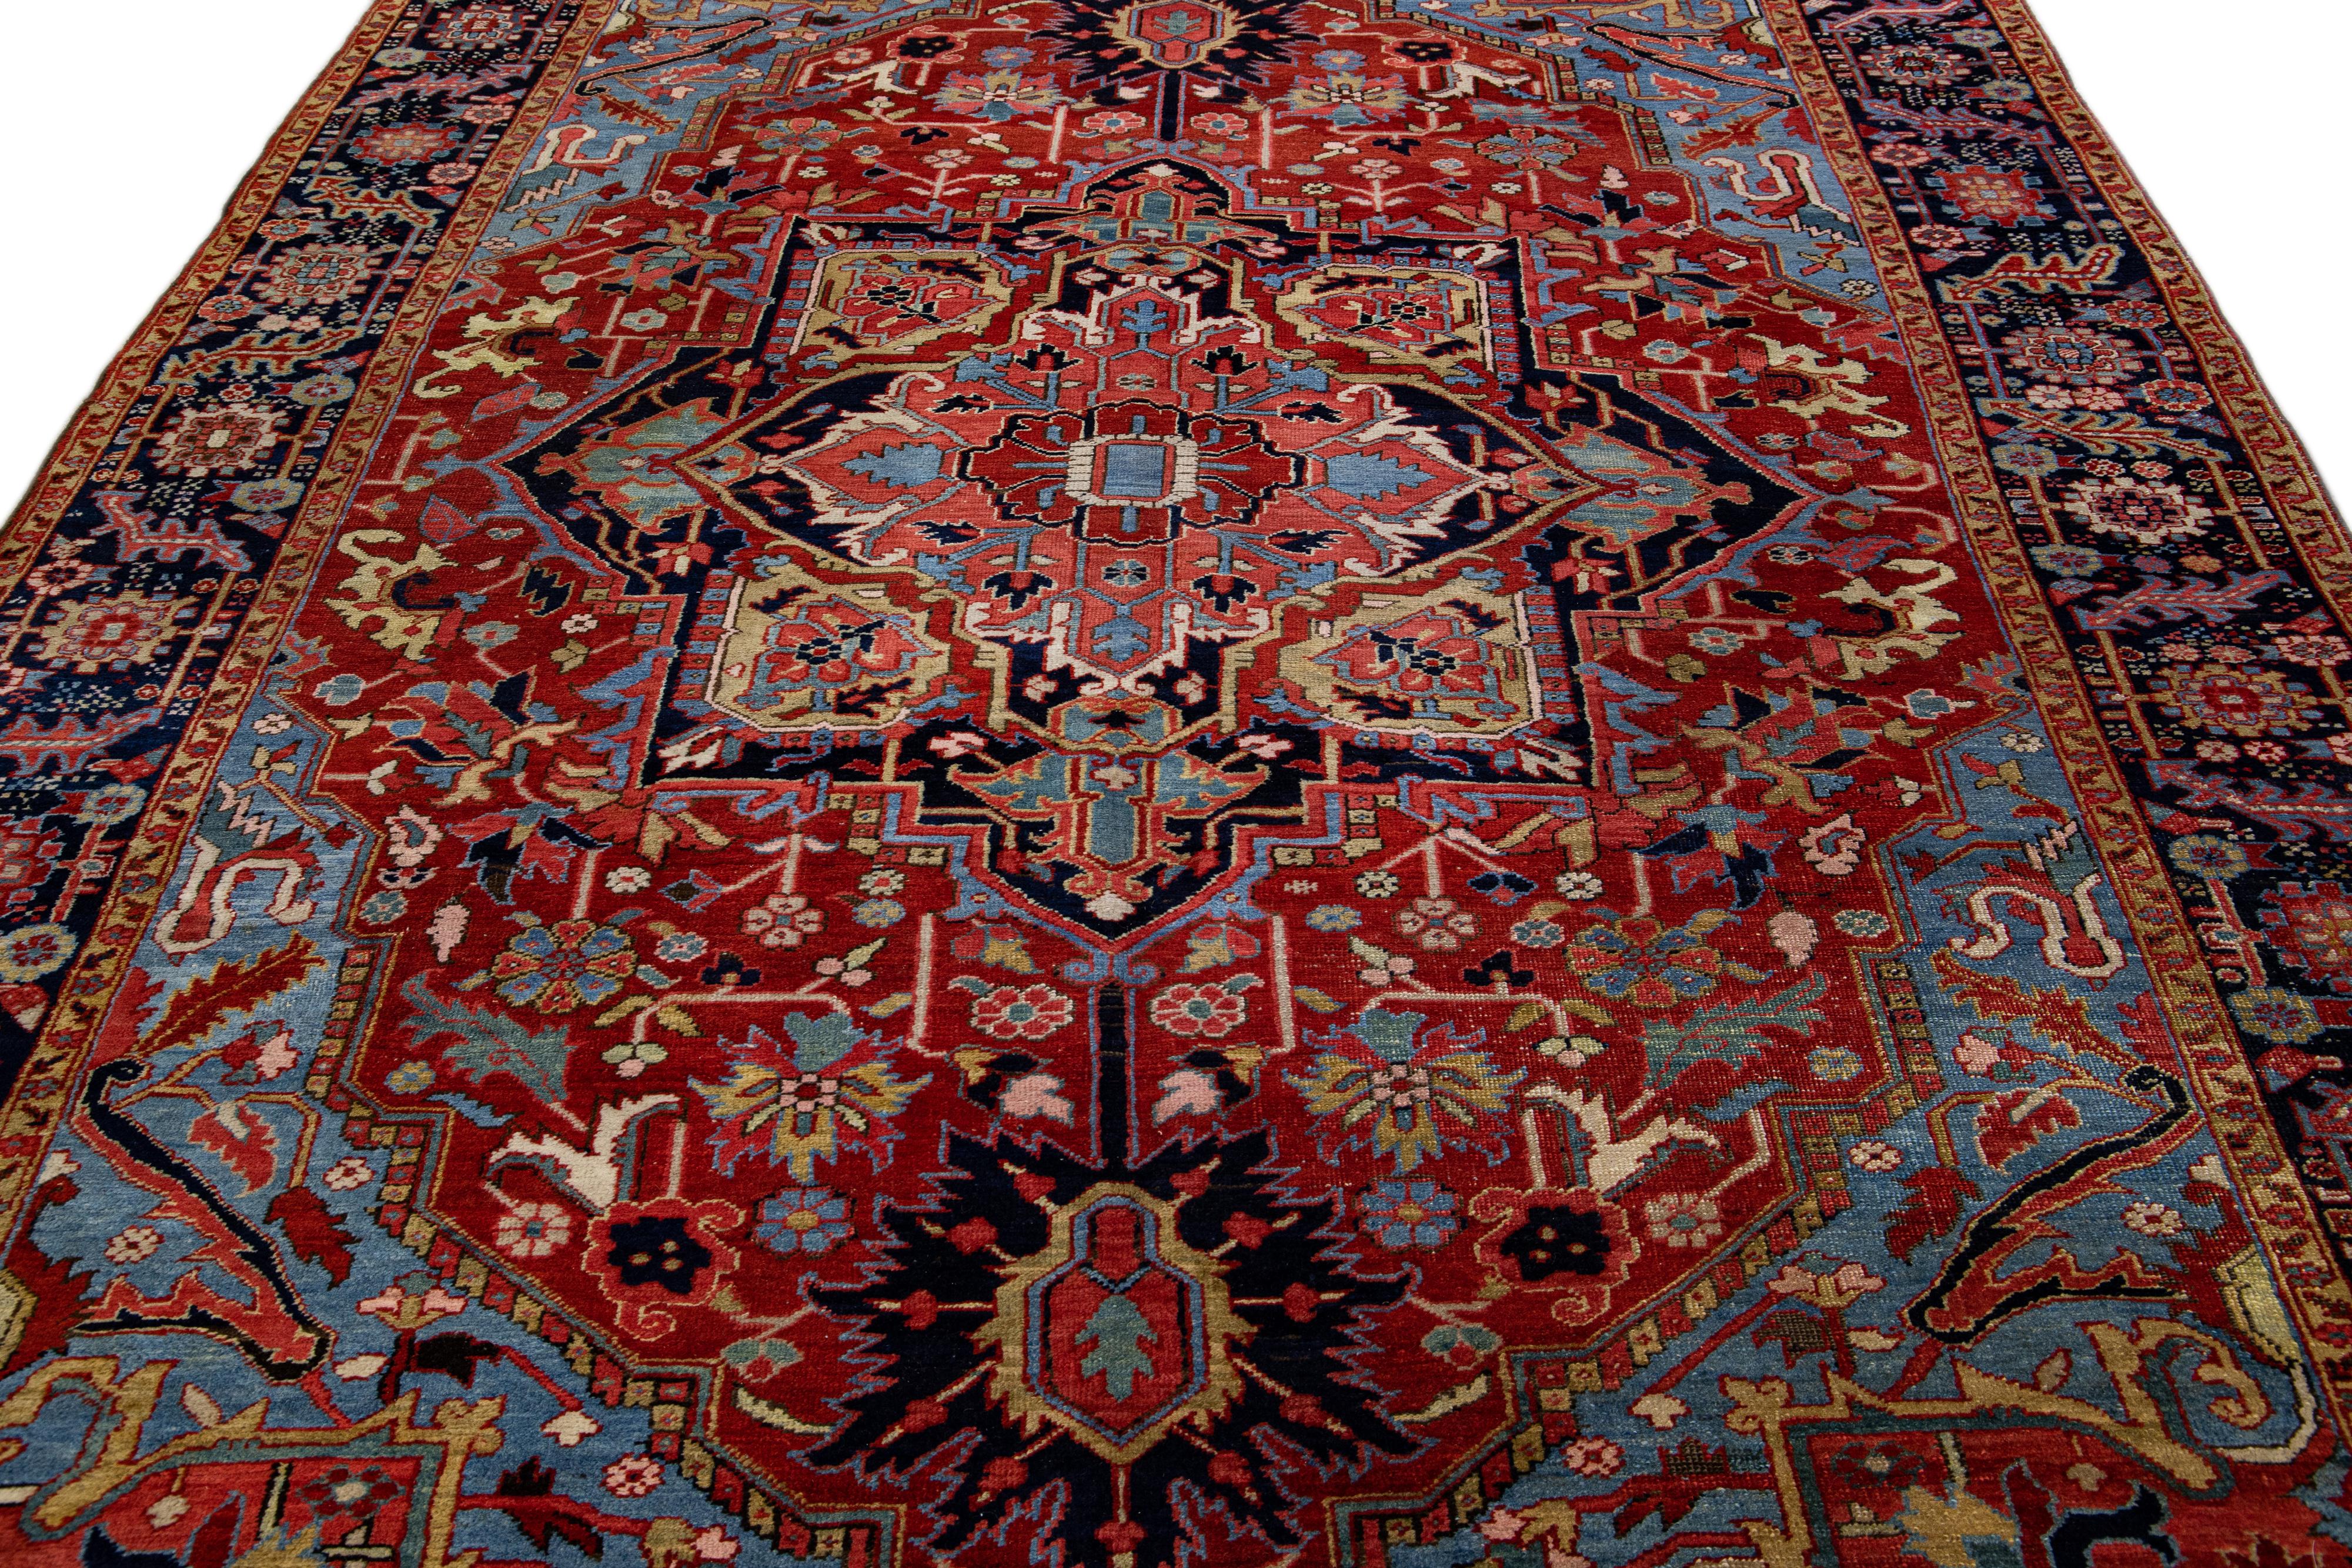 Beautiful antique Heriz hand-knotted wool rug with a red field. This Heriz rug has a navy-blue frame and multi-color accents in a gorgeous all-over Medallion floral design.

This rug measures: 7'8